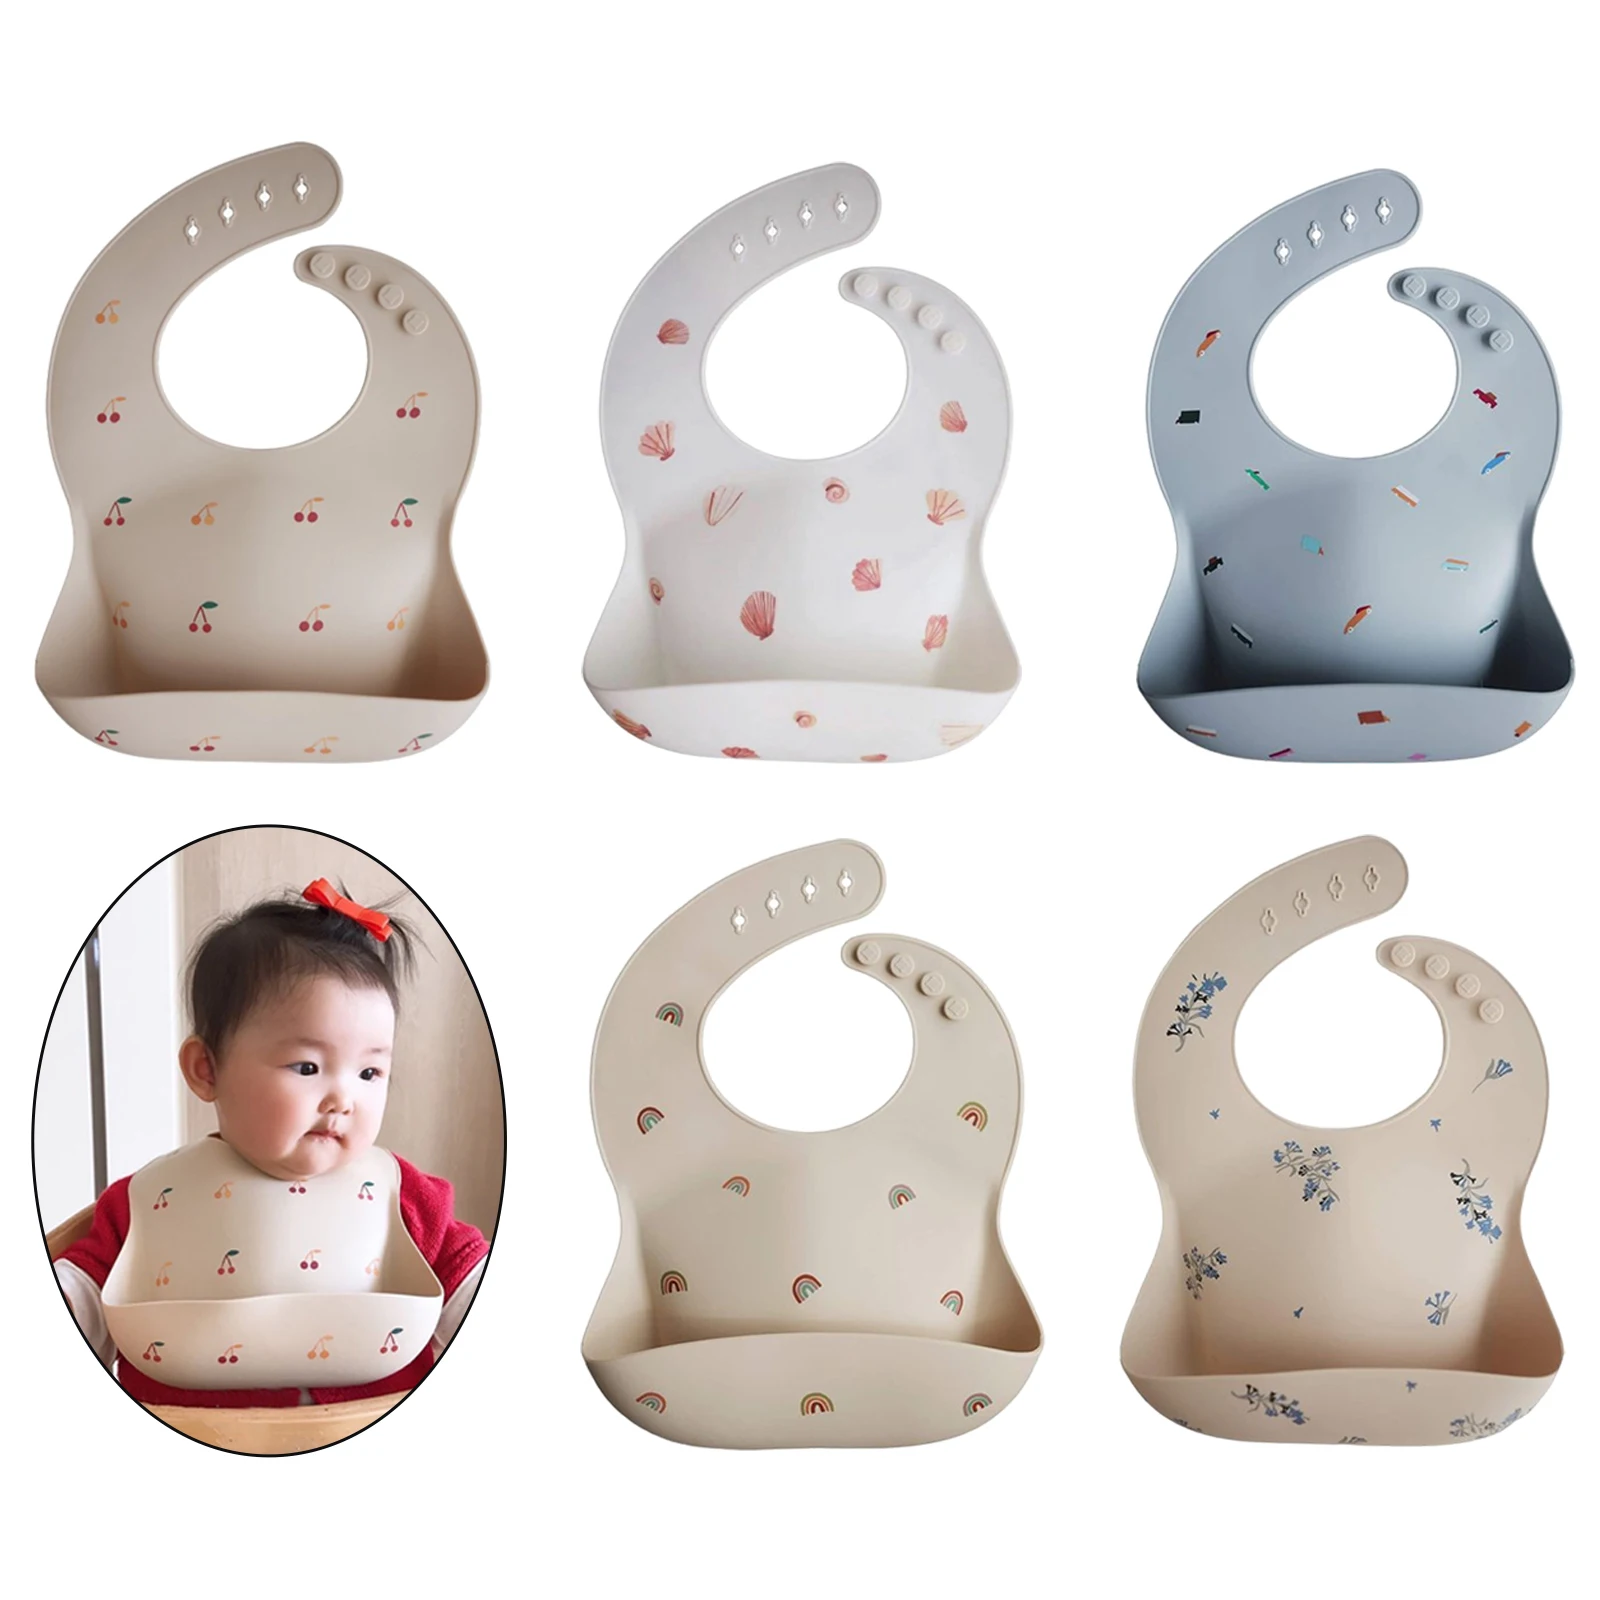 Silicone Baby Bibs BPA Free Waterproof Soft Durable Adjustable Silicone Bibs for Babies & Toddlers